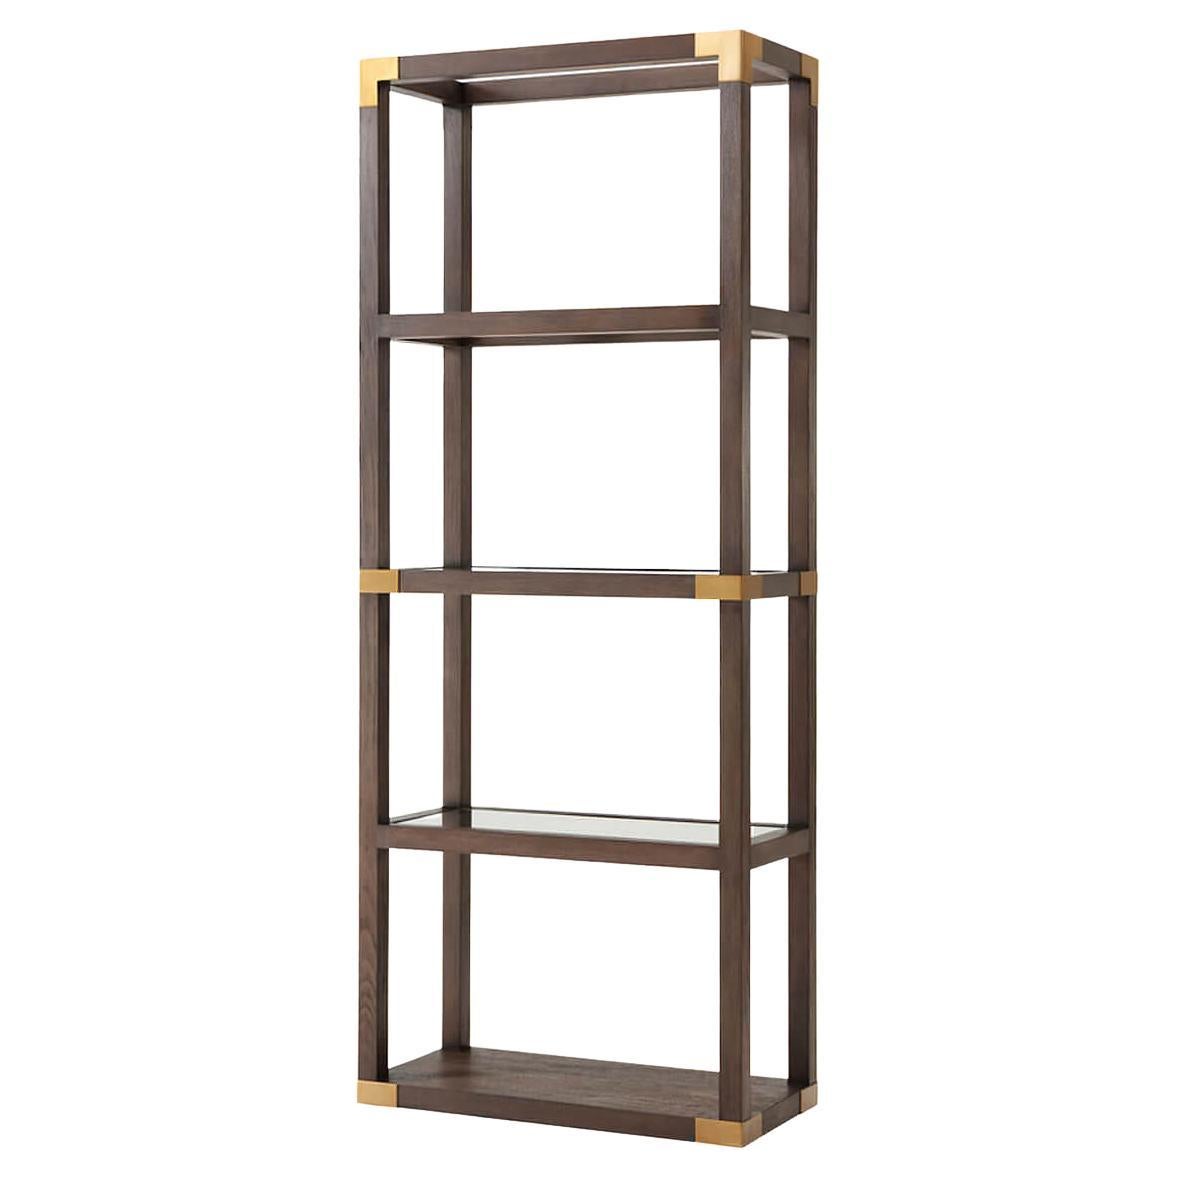 Campaign Style Etagere